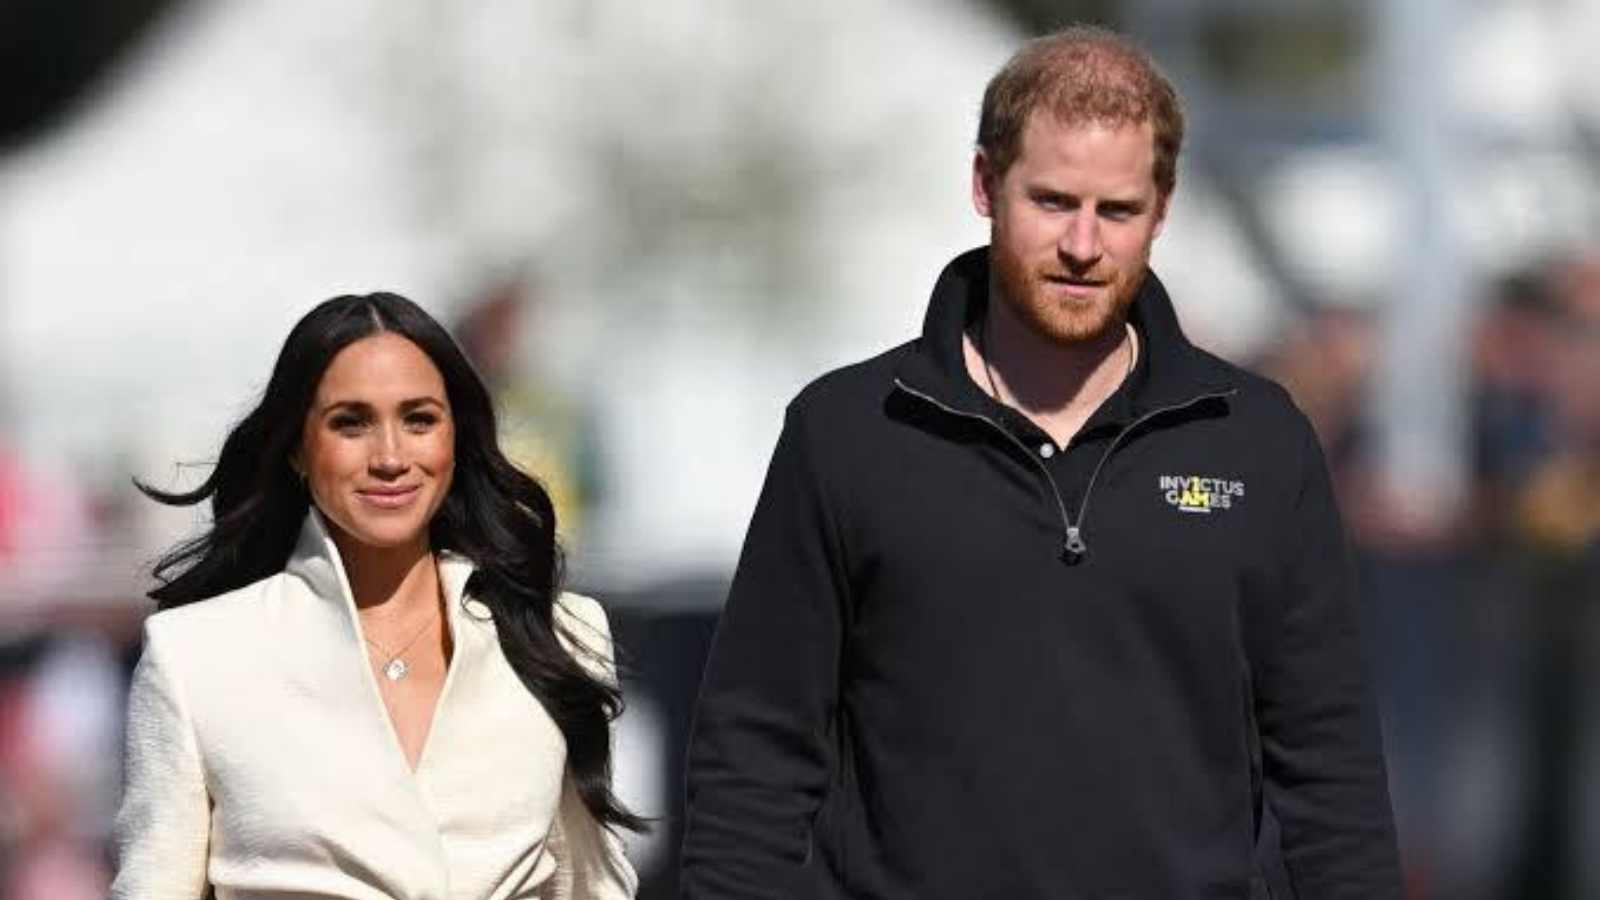 Relocating to new homes after exiting from the royal family was a task for Prince Harry and Meghan Markle